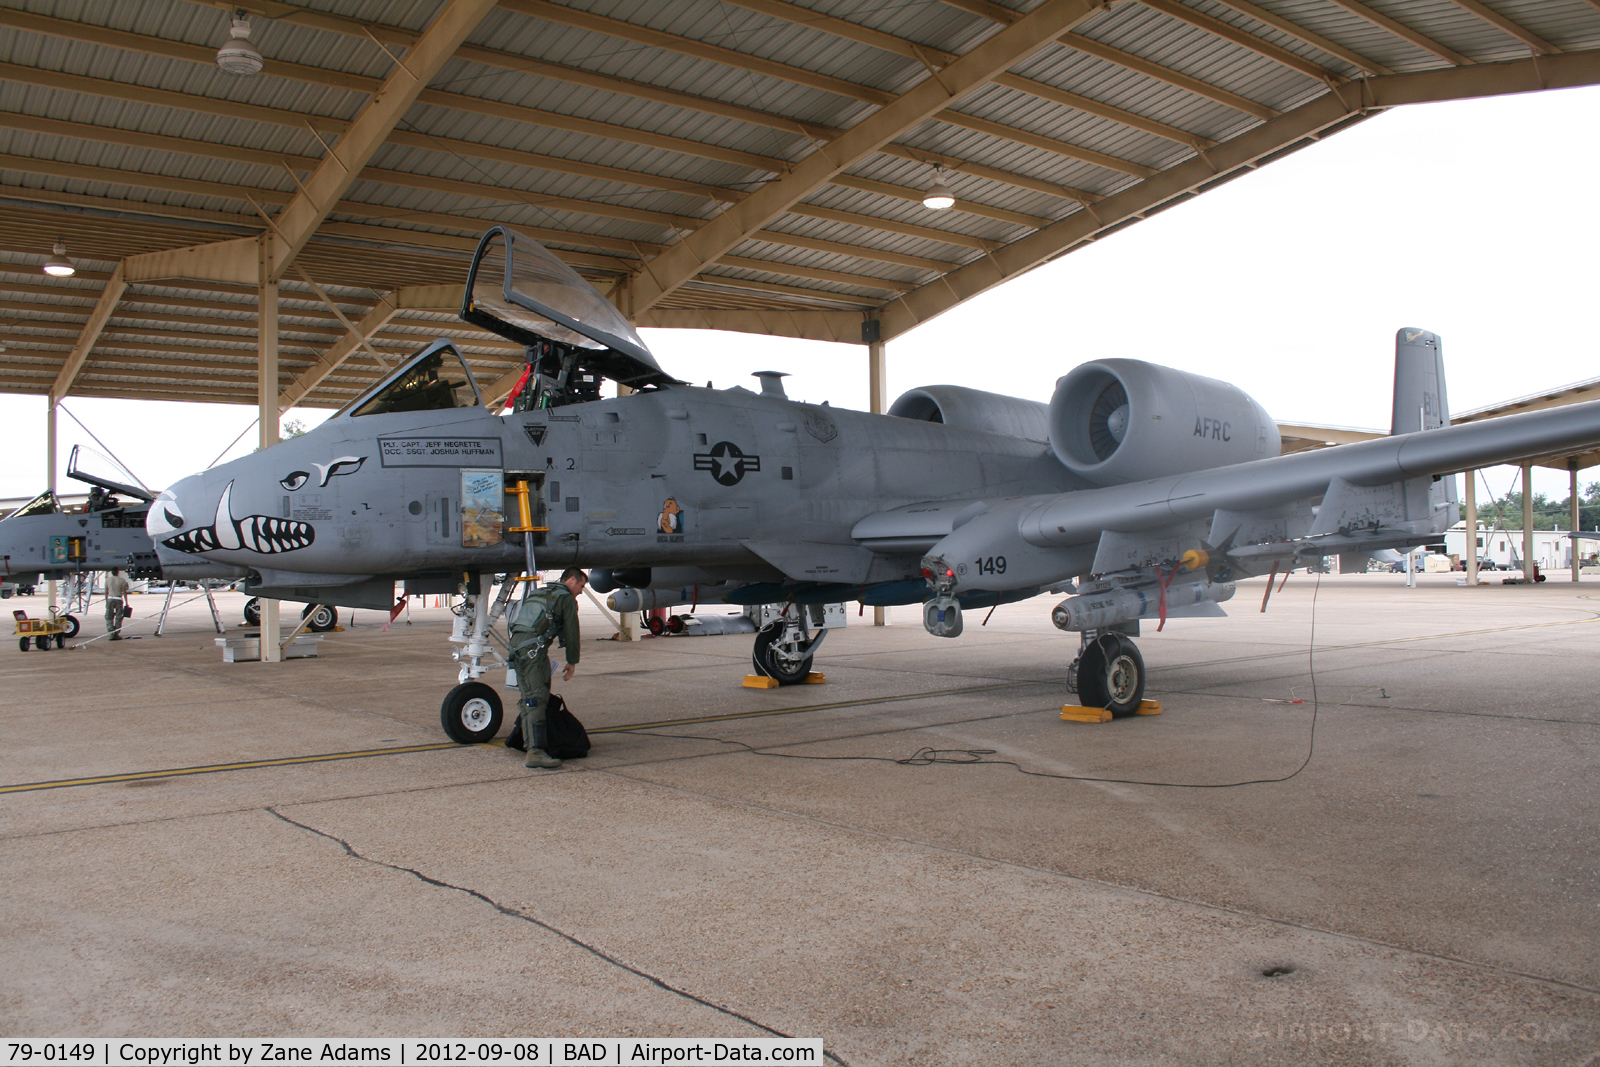 79-0149, 1979 Fairchild Republic A-10C Thunderbolt II C/N A10-0413, At Barksdale Air Force Base -47th Fighter Squadron